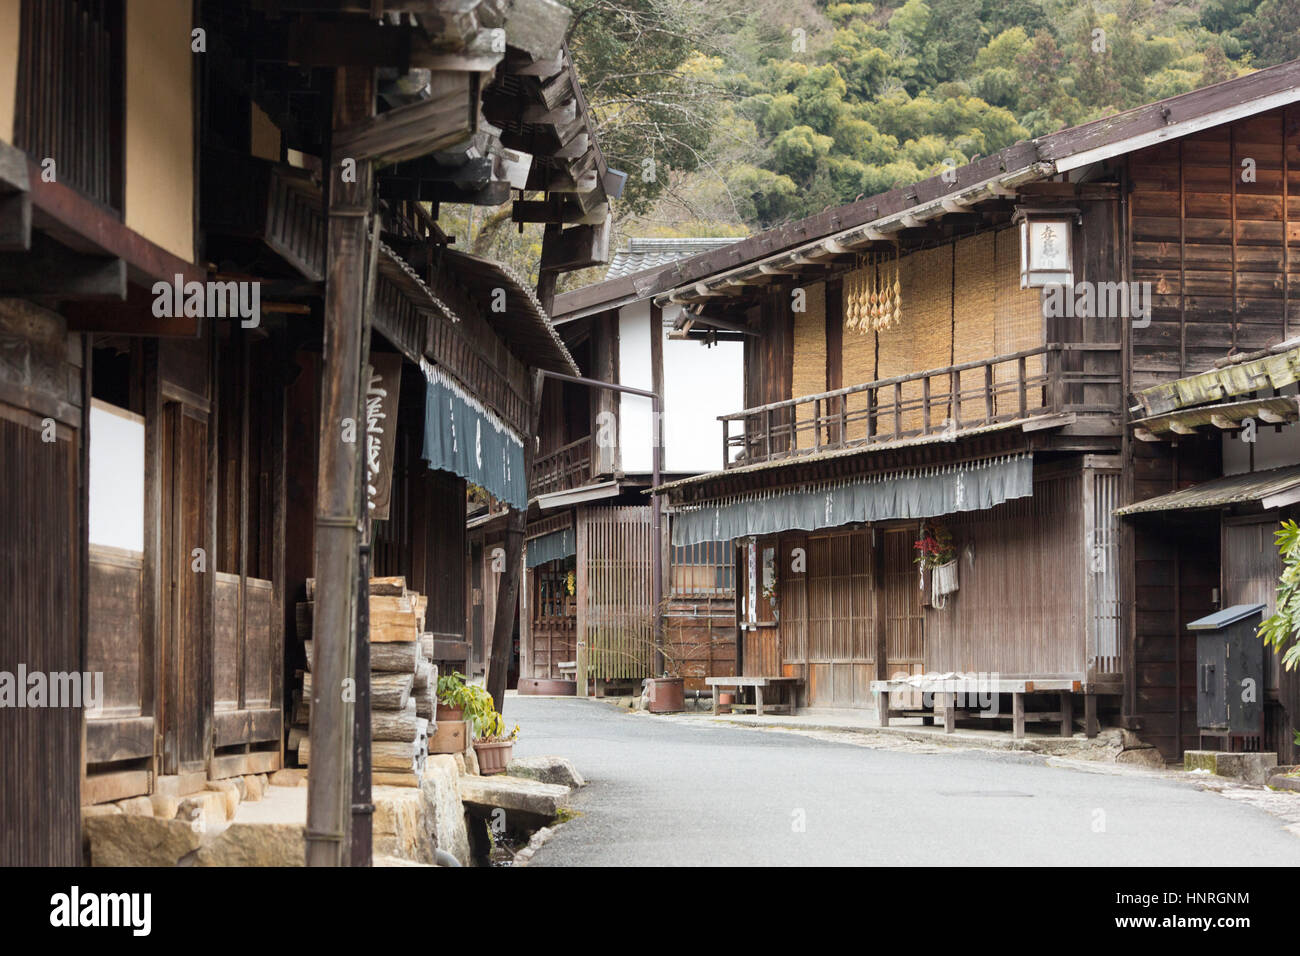 Japan . Tsumago-juku ( Tsumago ) . Street scene in the preserved post town showing traditional Japanese buildings Stock Photo